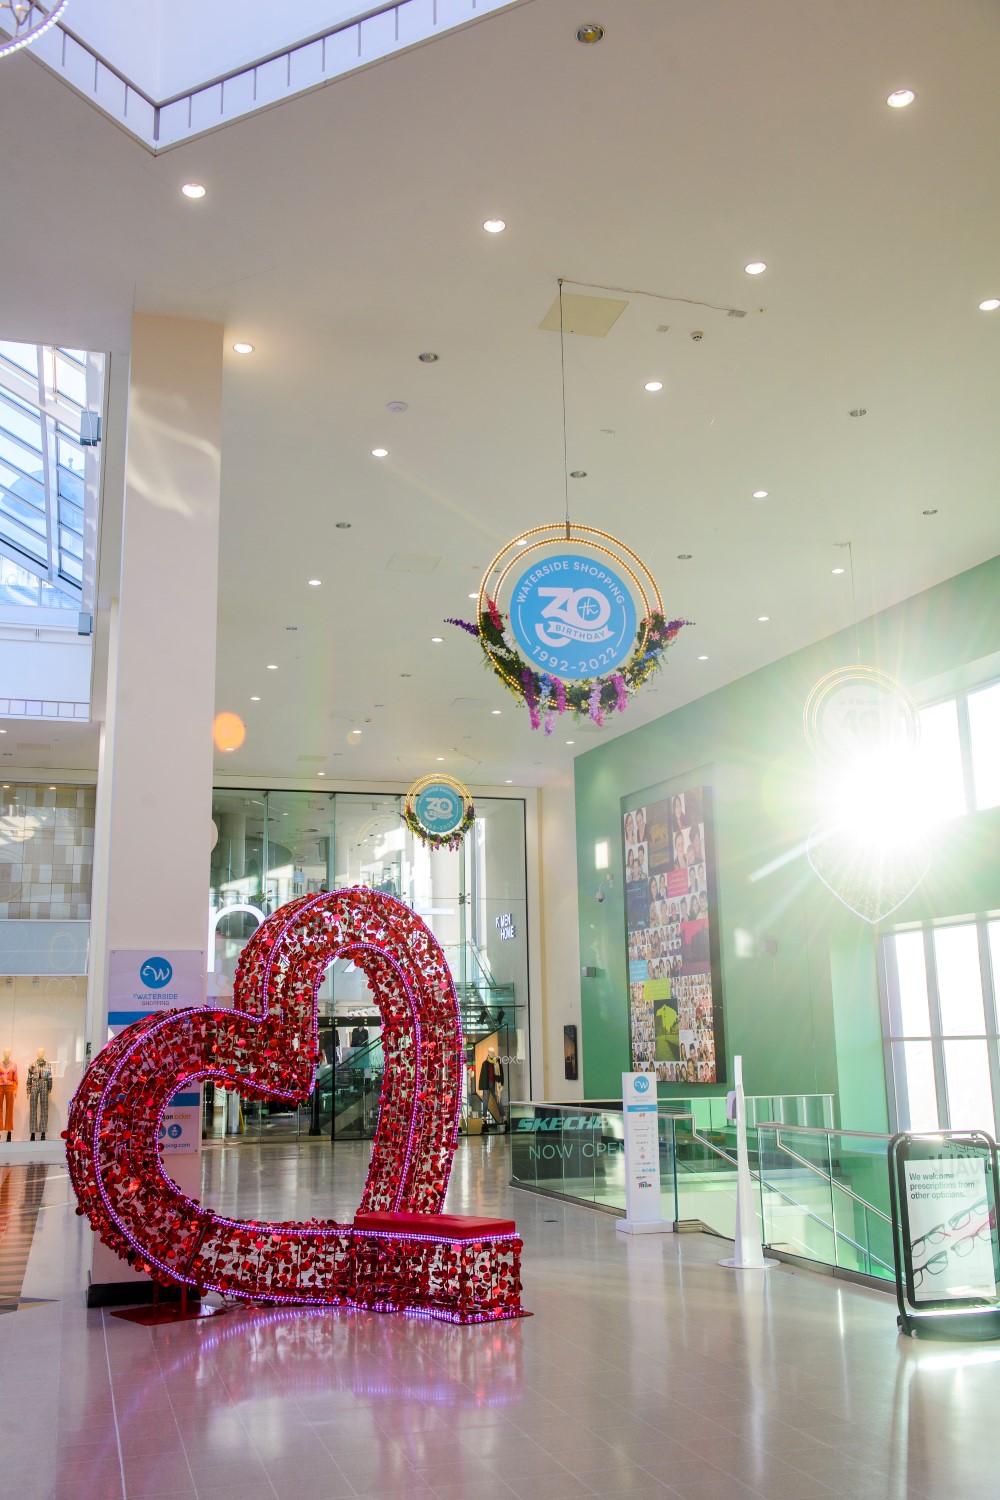 Heart seat by Fizzco Projects displayed in the Waterside Shopping Centre in Lincoln for the Shopping Centre's 30th anniversary.